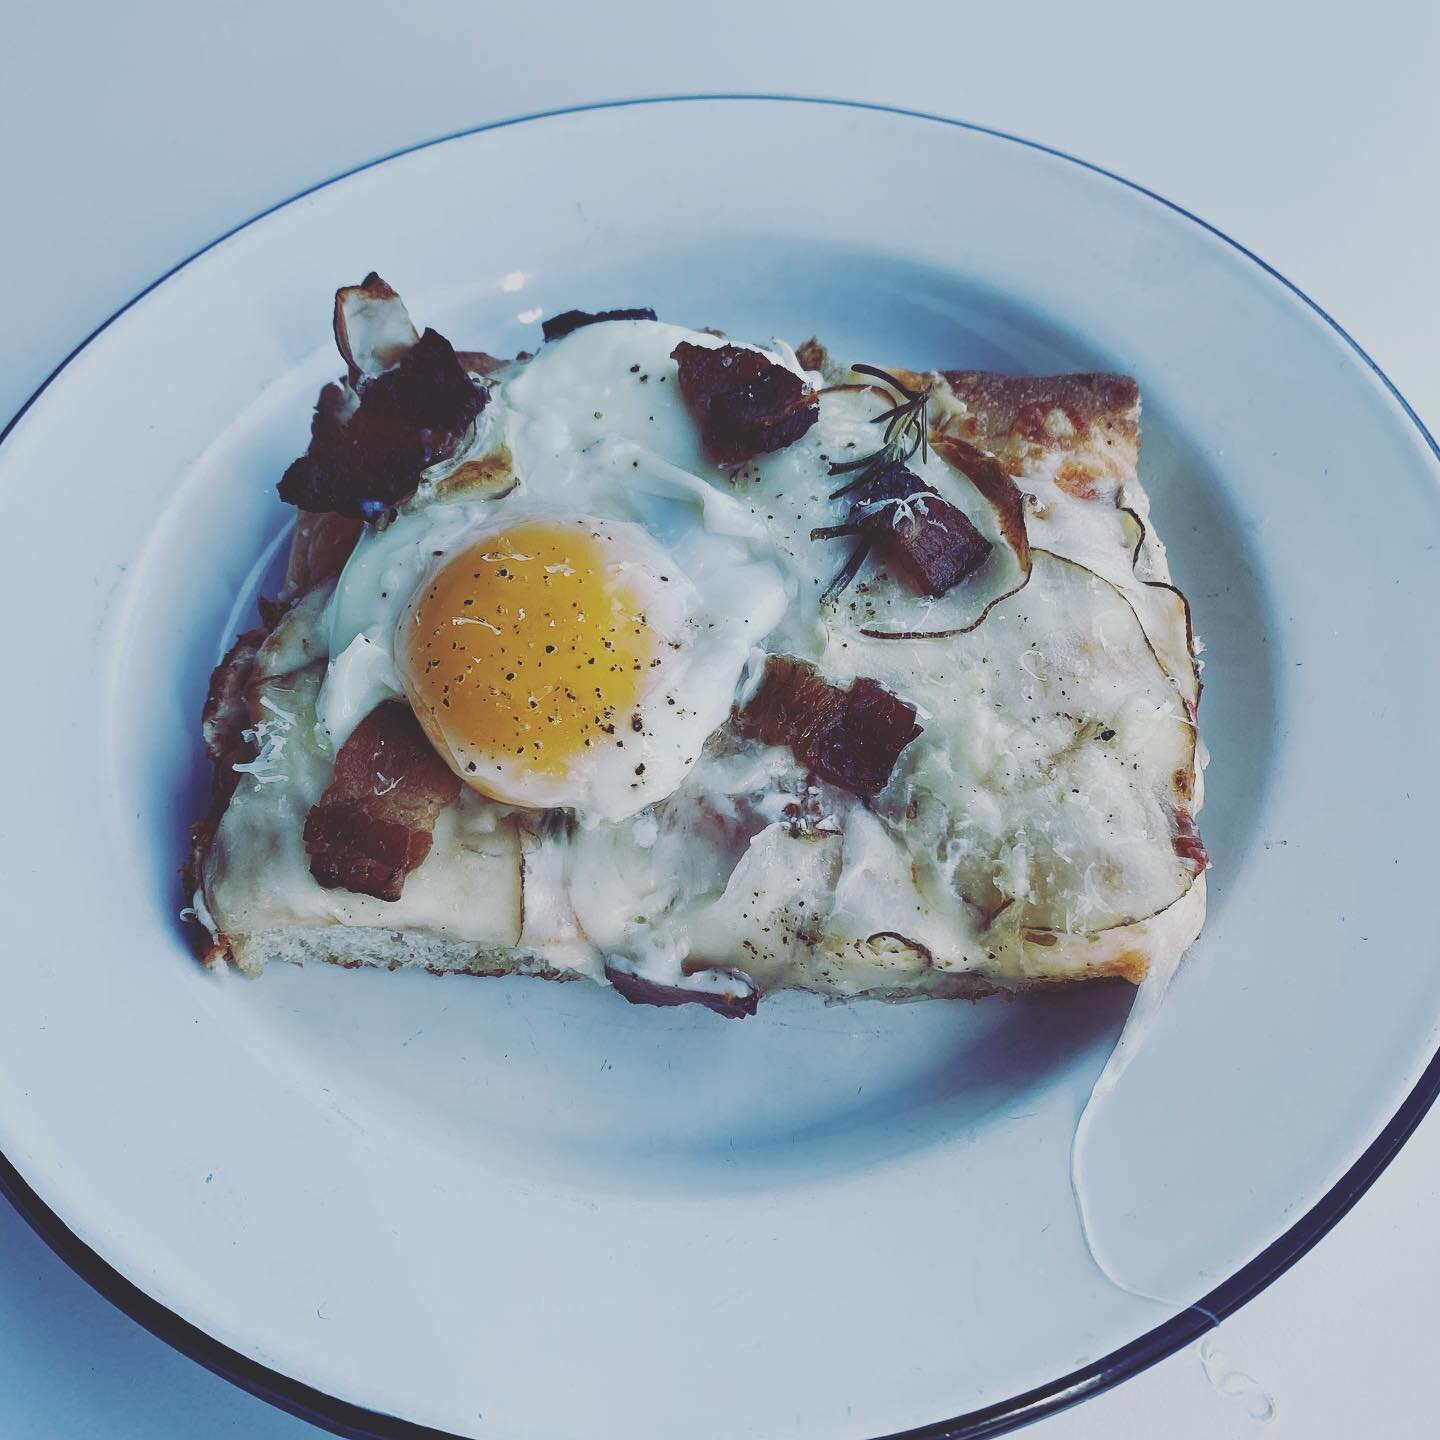 While we may lack photography skills we do think that this breakfast slice with SOCO bacon hits the mark. And it&rsquo;s only $7.00! Available in the Barlow today and tomorrow